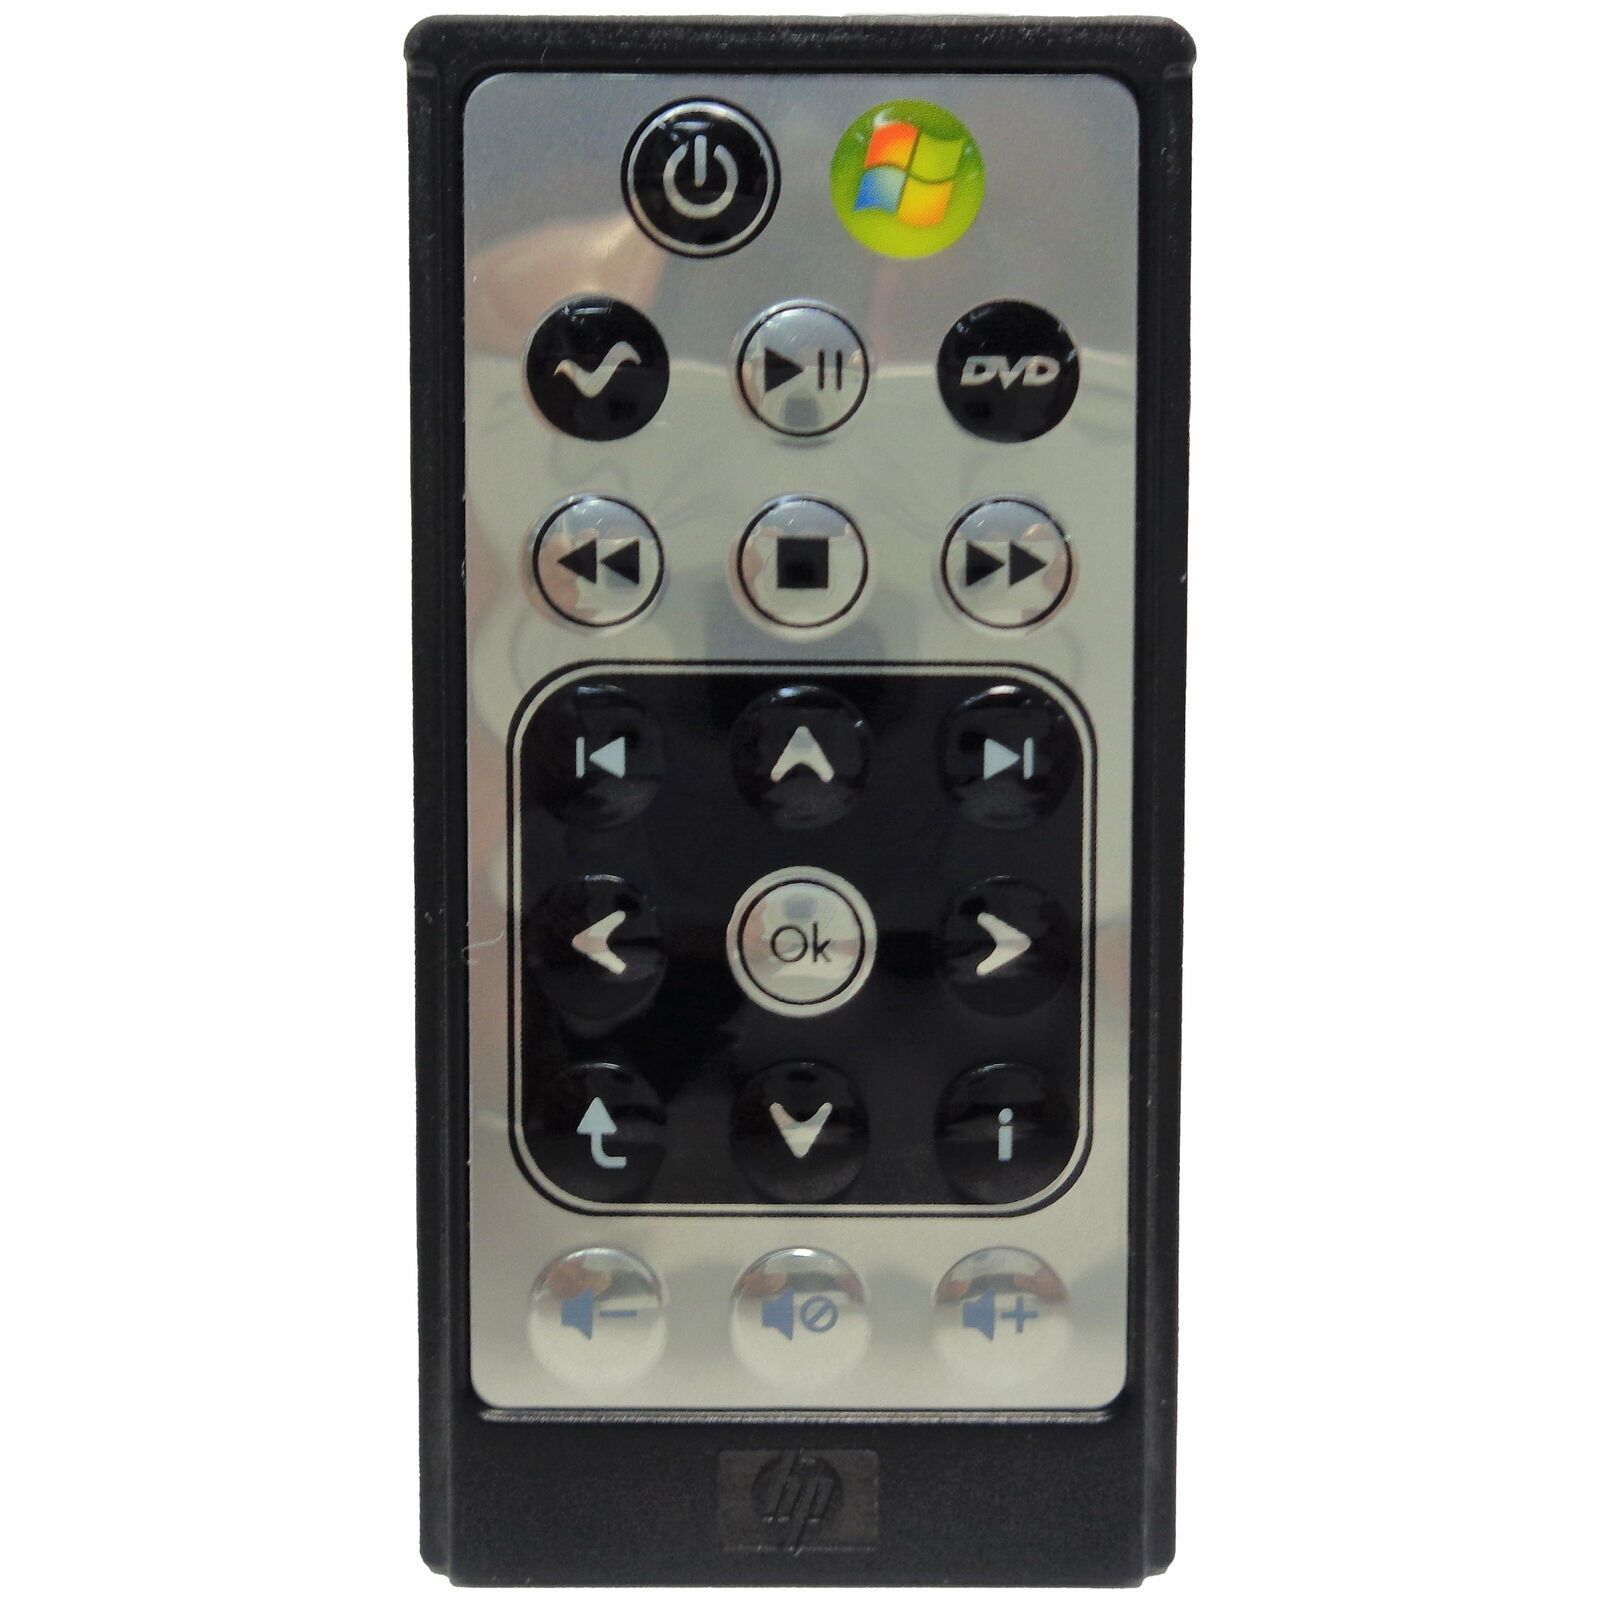 Primary image for HP RC2002003/01B Touchsmart Factory Original Computer Media Center Remote